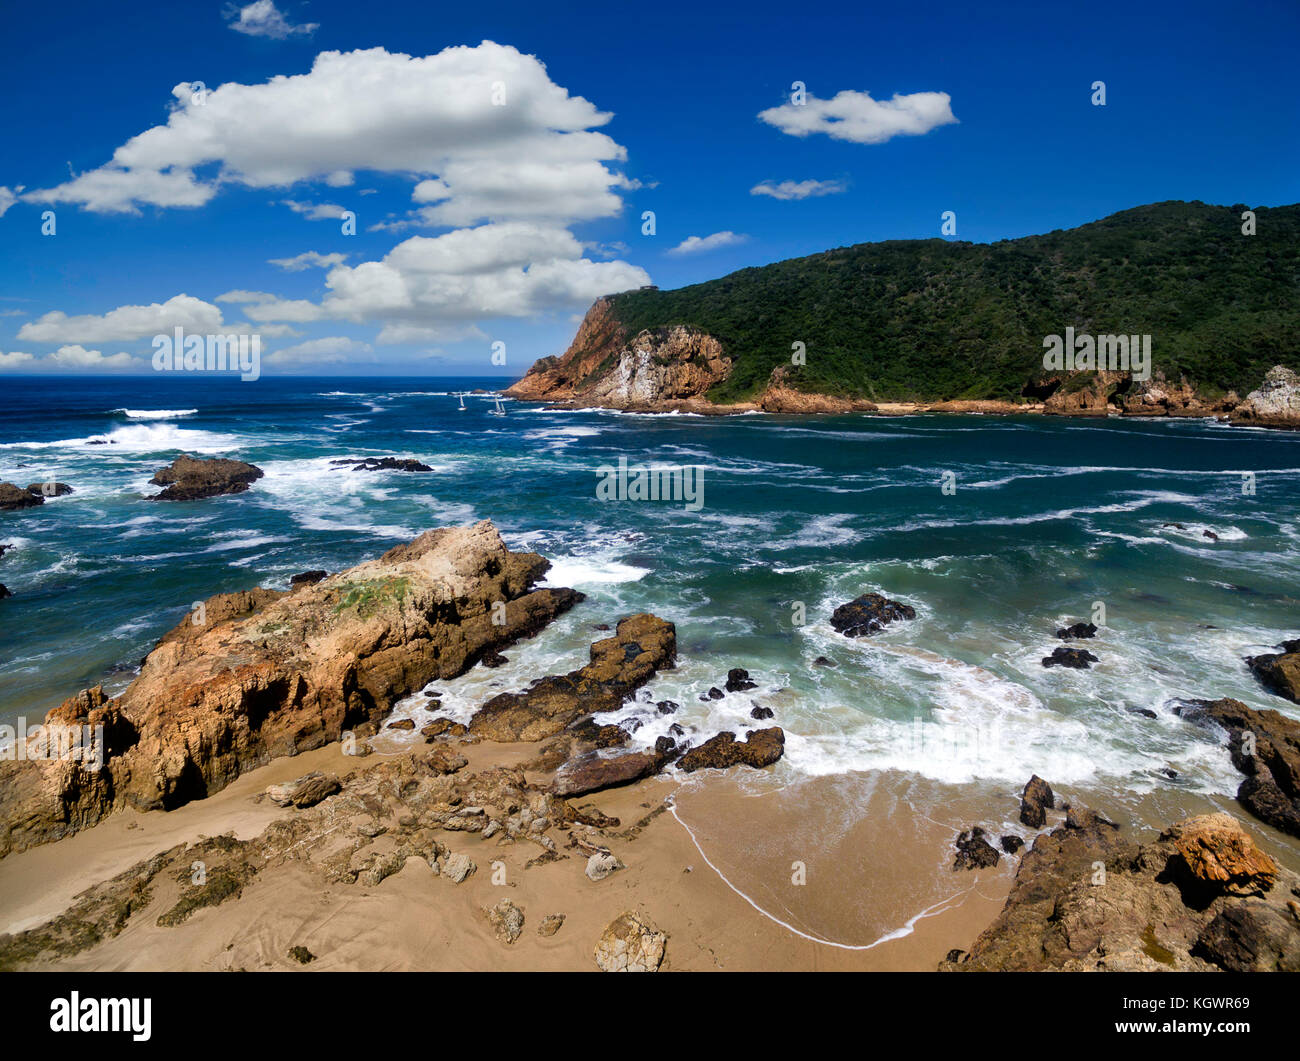 The Cliffs and Rocky coastline of Knysna, South Africa Stock Photo